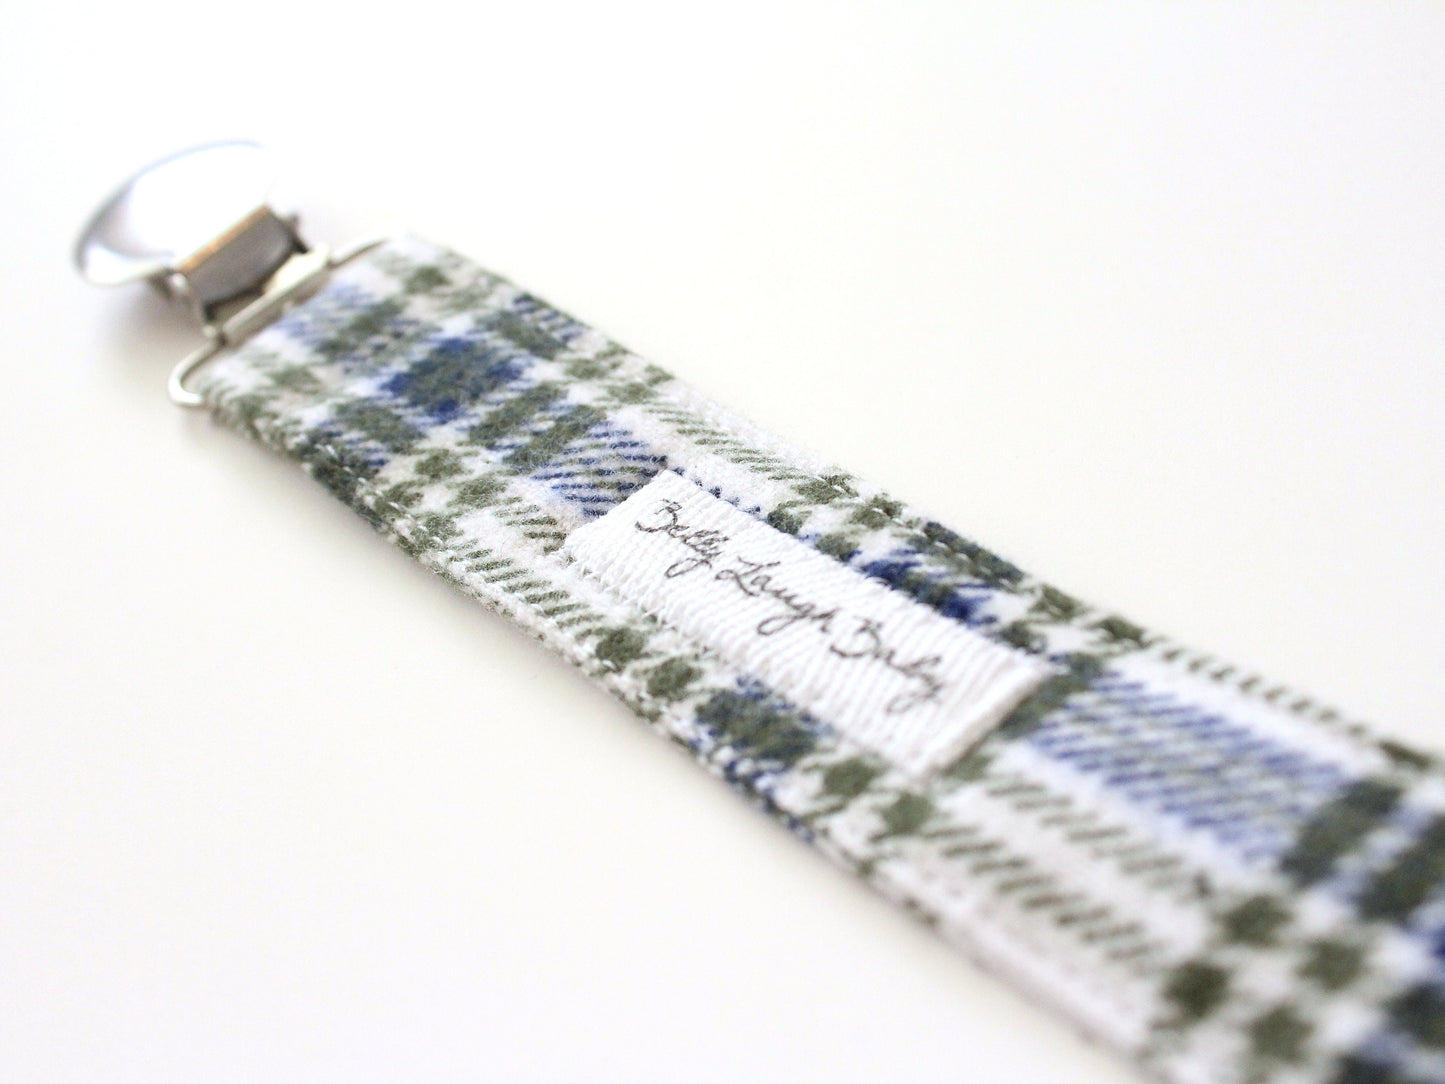 Blue and Green Plaid Fabric Pacifier Clip | Gender Neutral Baby Gift | Soother Leash Binky Holder | CPSC Compliant